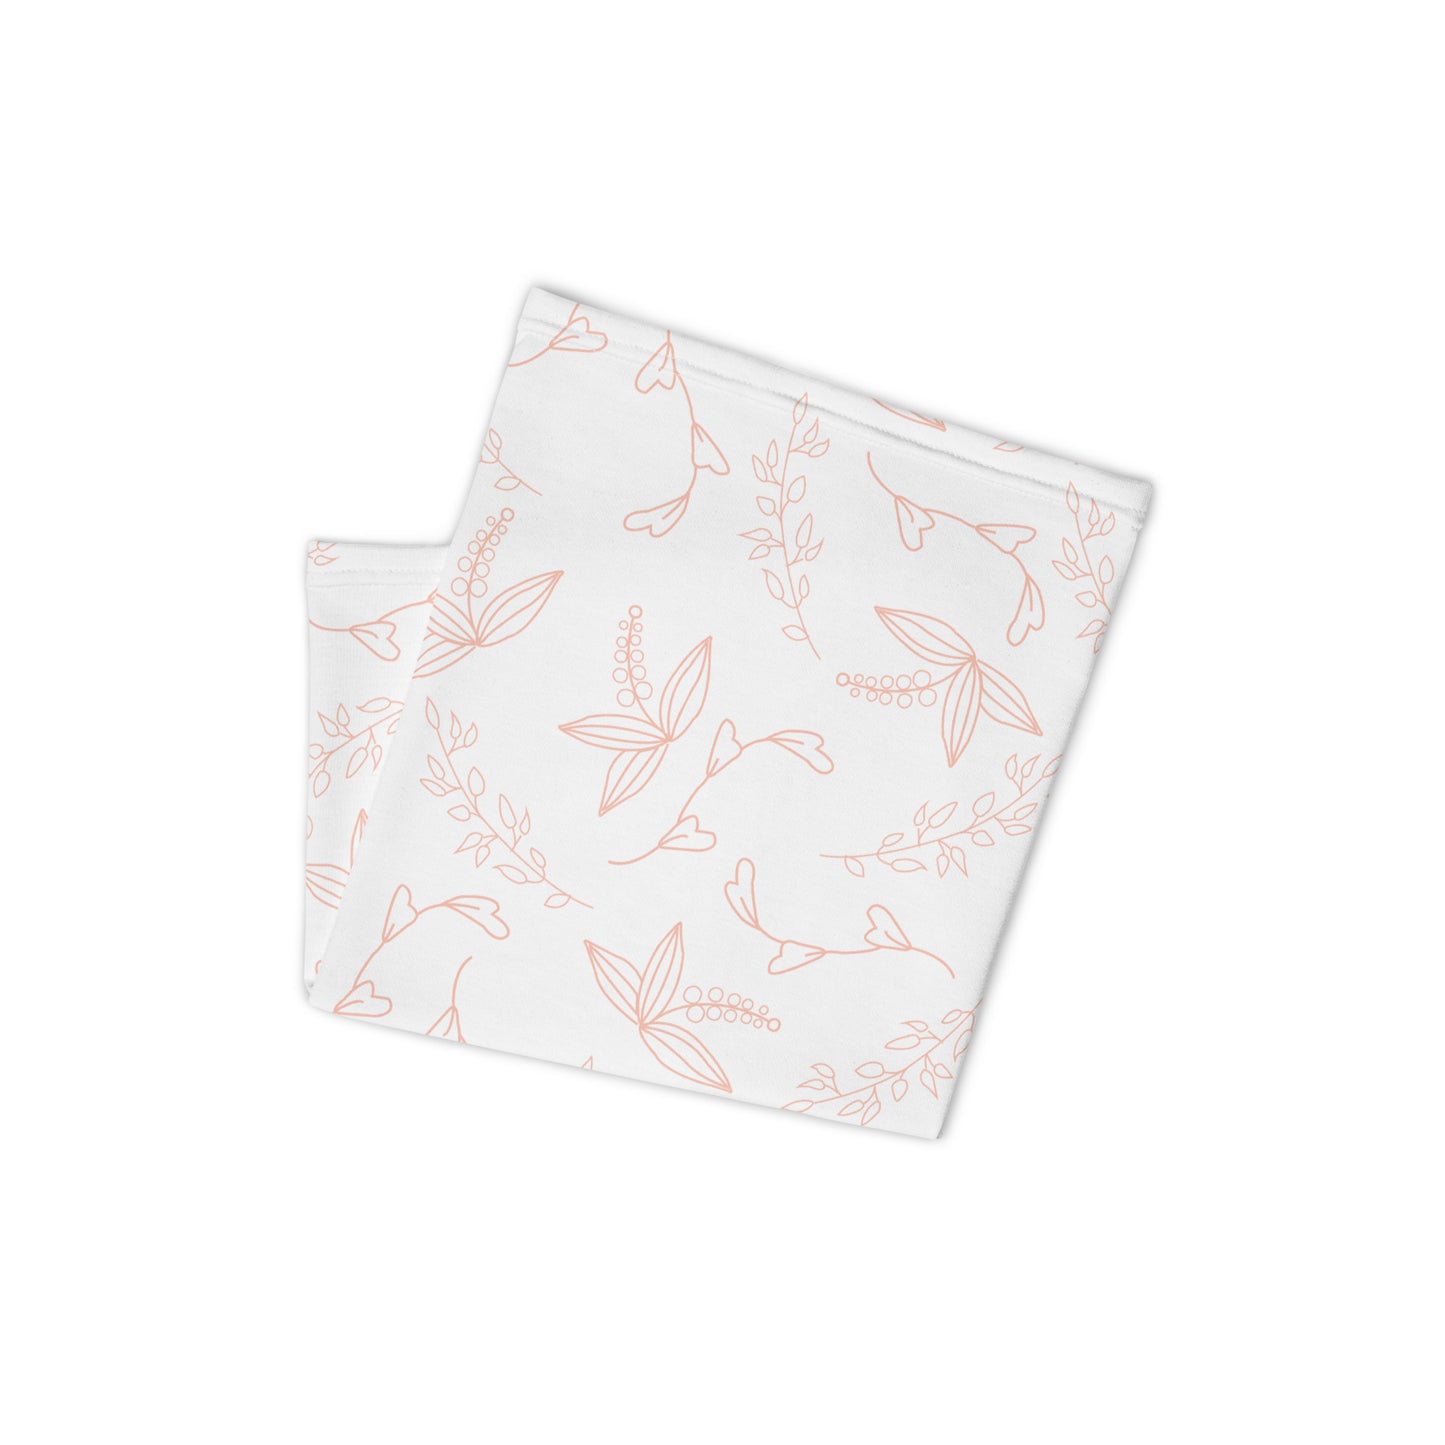 White Floral - Sustainably Made Neck Gaiter